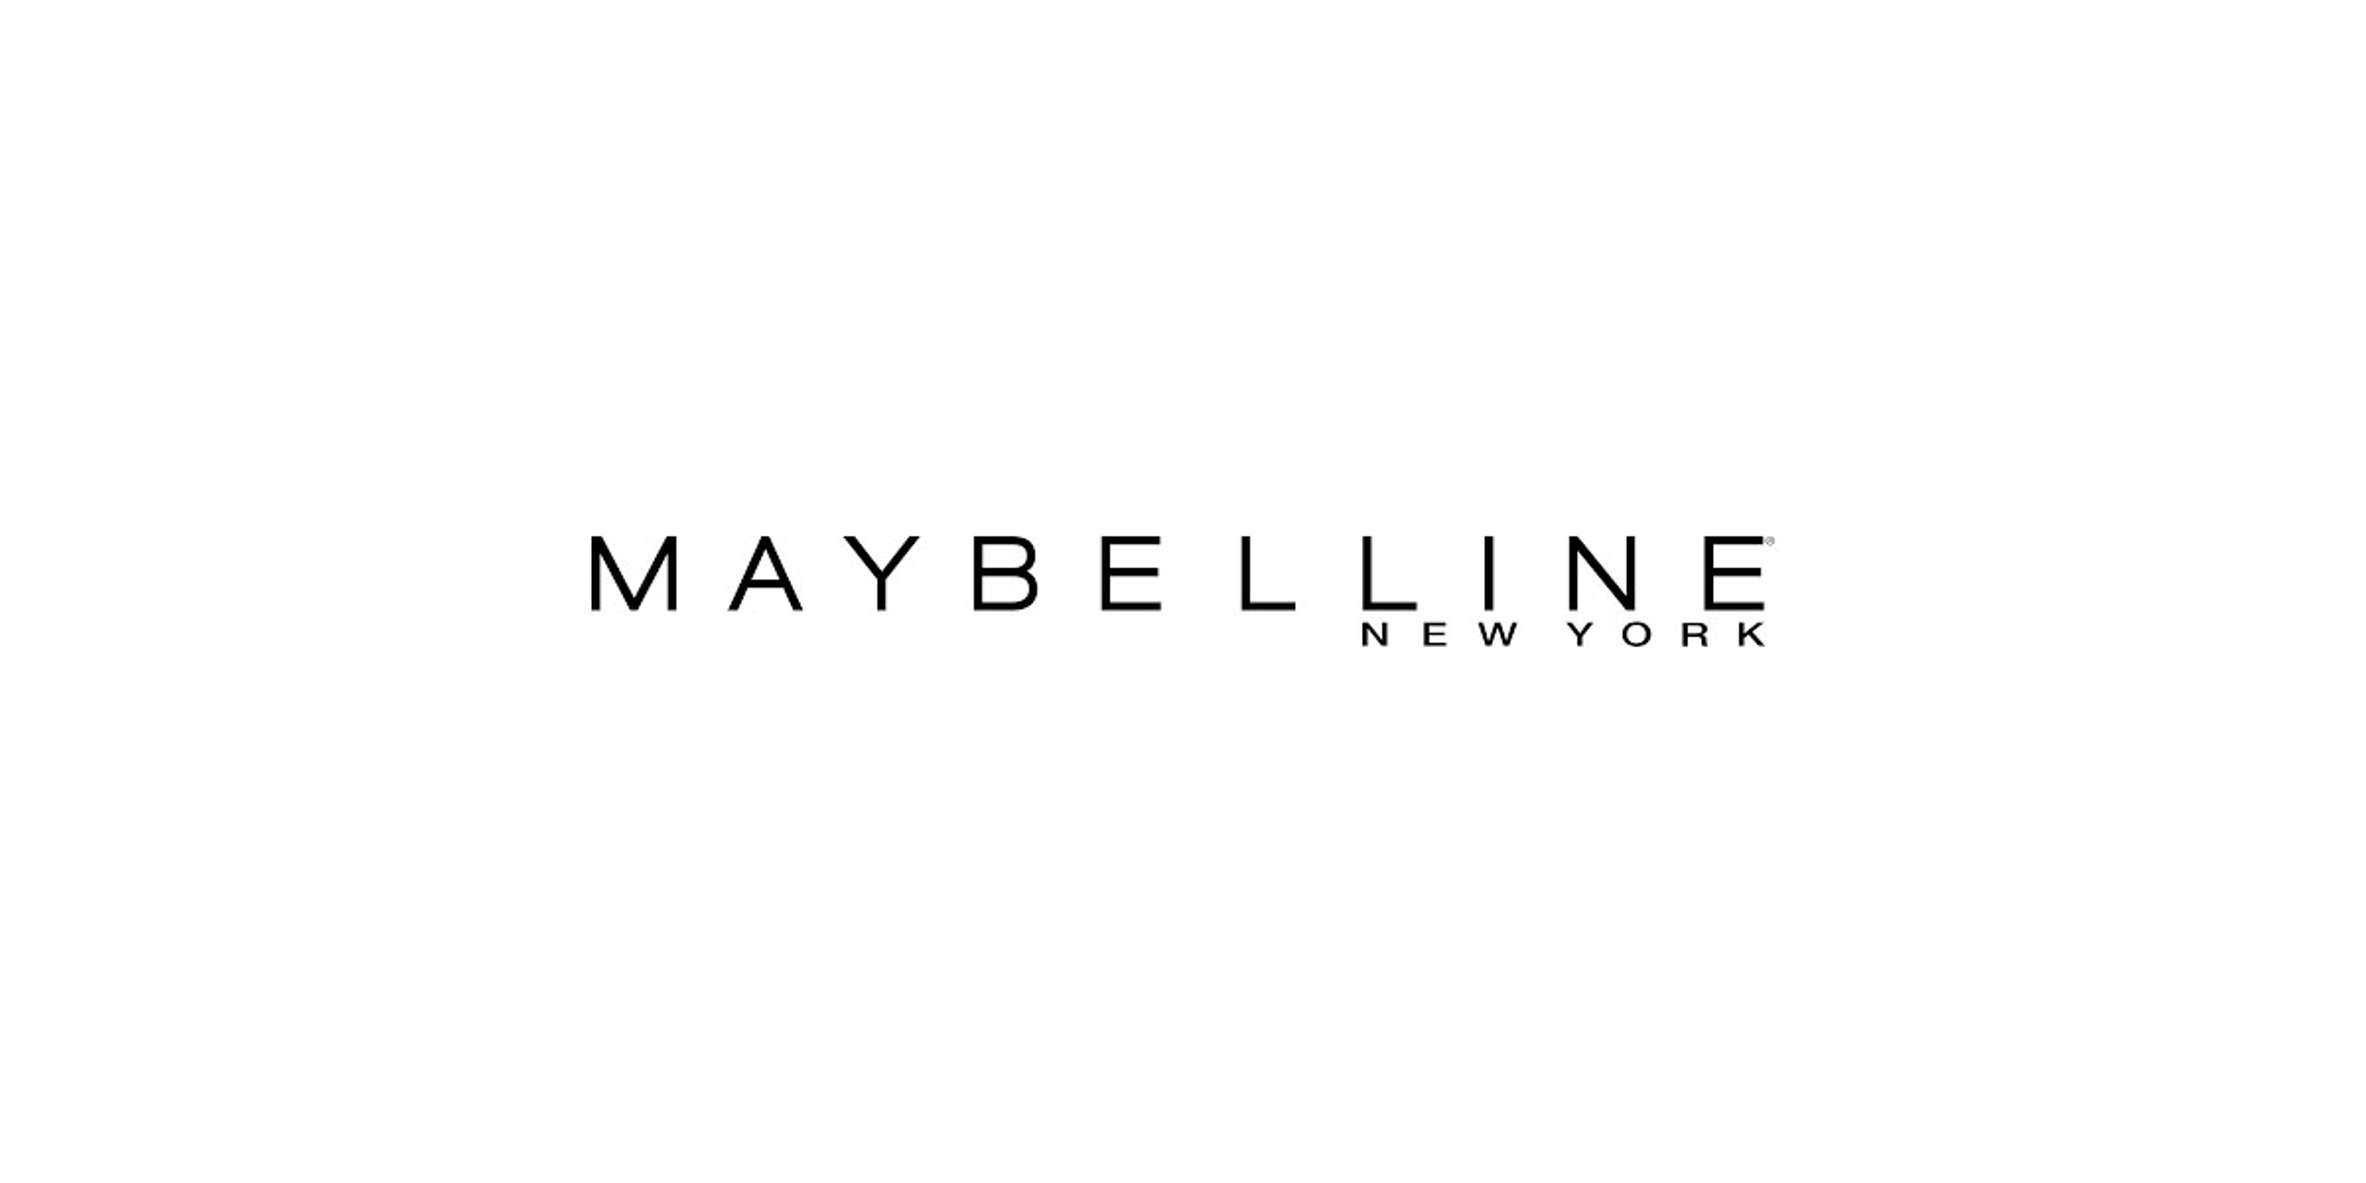 Rush Call for Maybelline Video Shoot